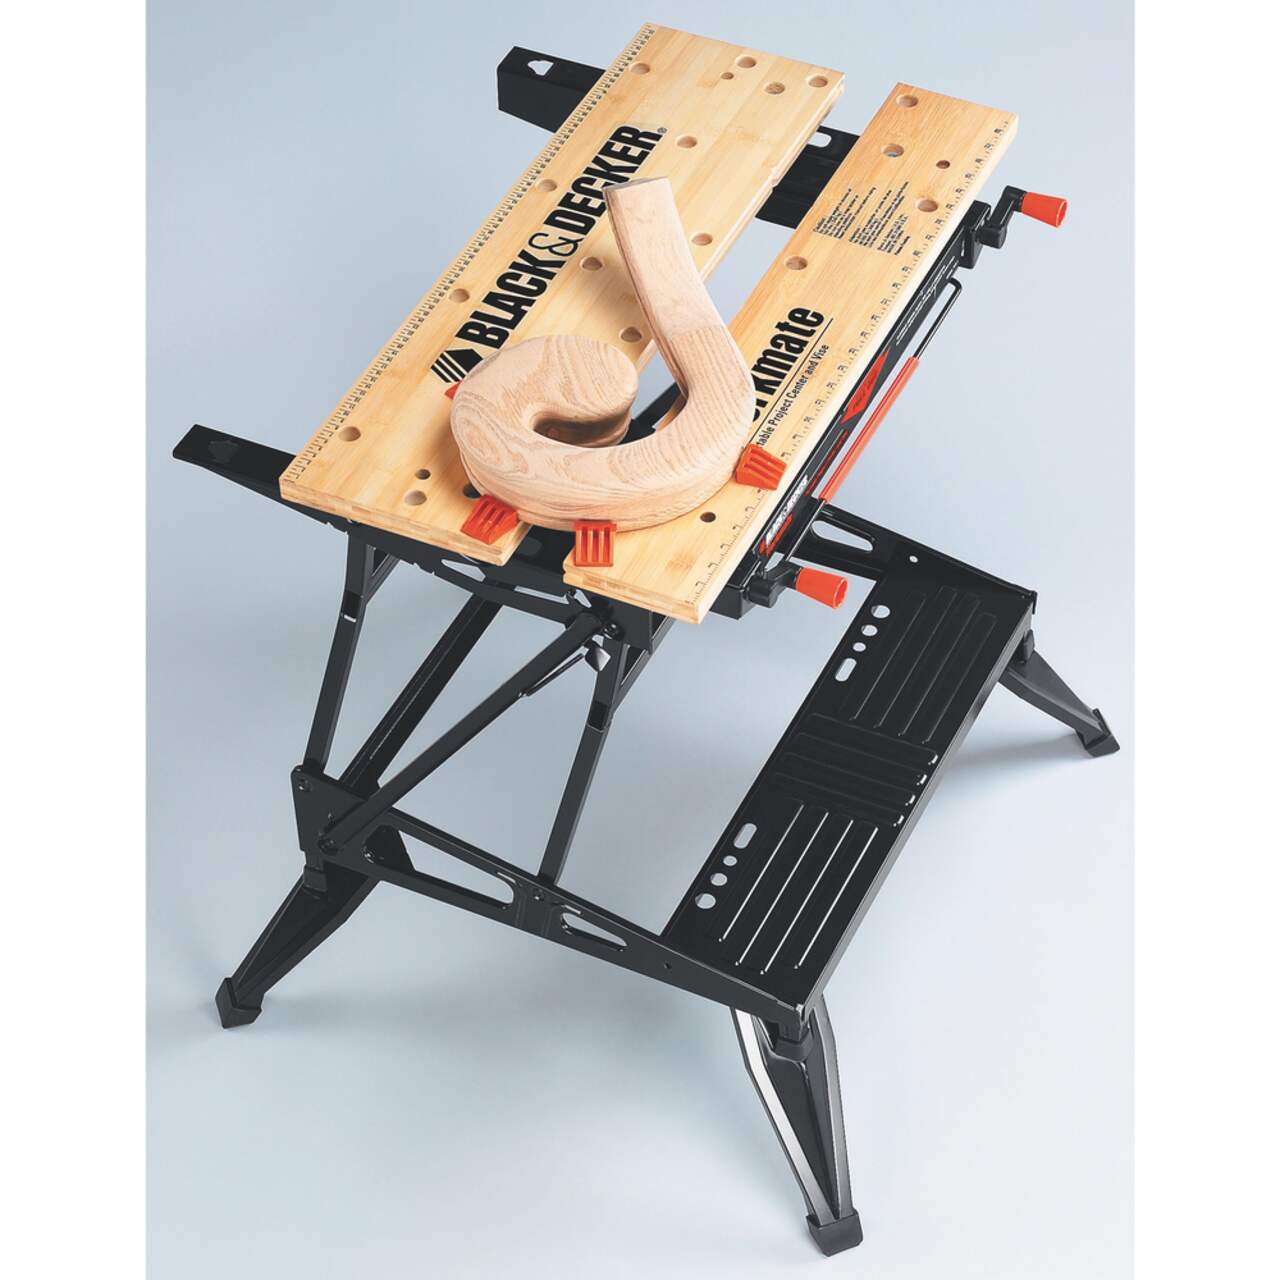 https://media-www.canadiantire.ca/product/fixing/tools/tool-storage/0740491/workmate-550-lbs-9a19e17f-8aab-416a-9024-6a682317d956.png?imdensity=1&imwidth=640&impolicy=mZoom